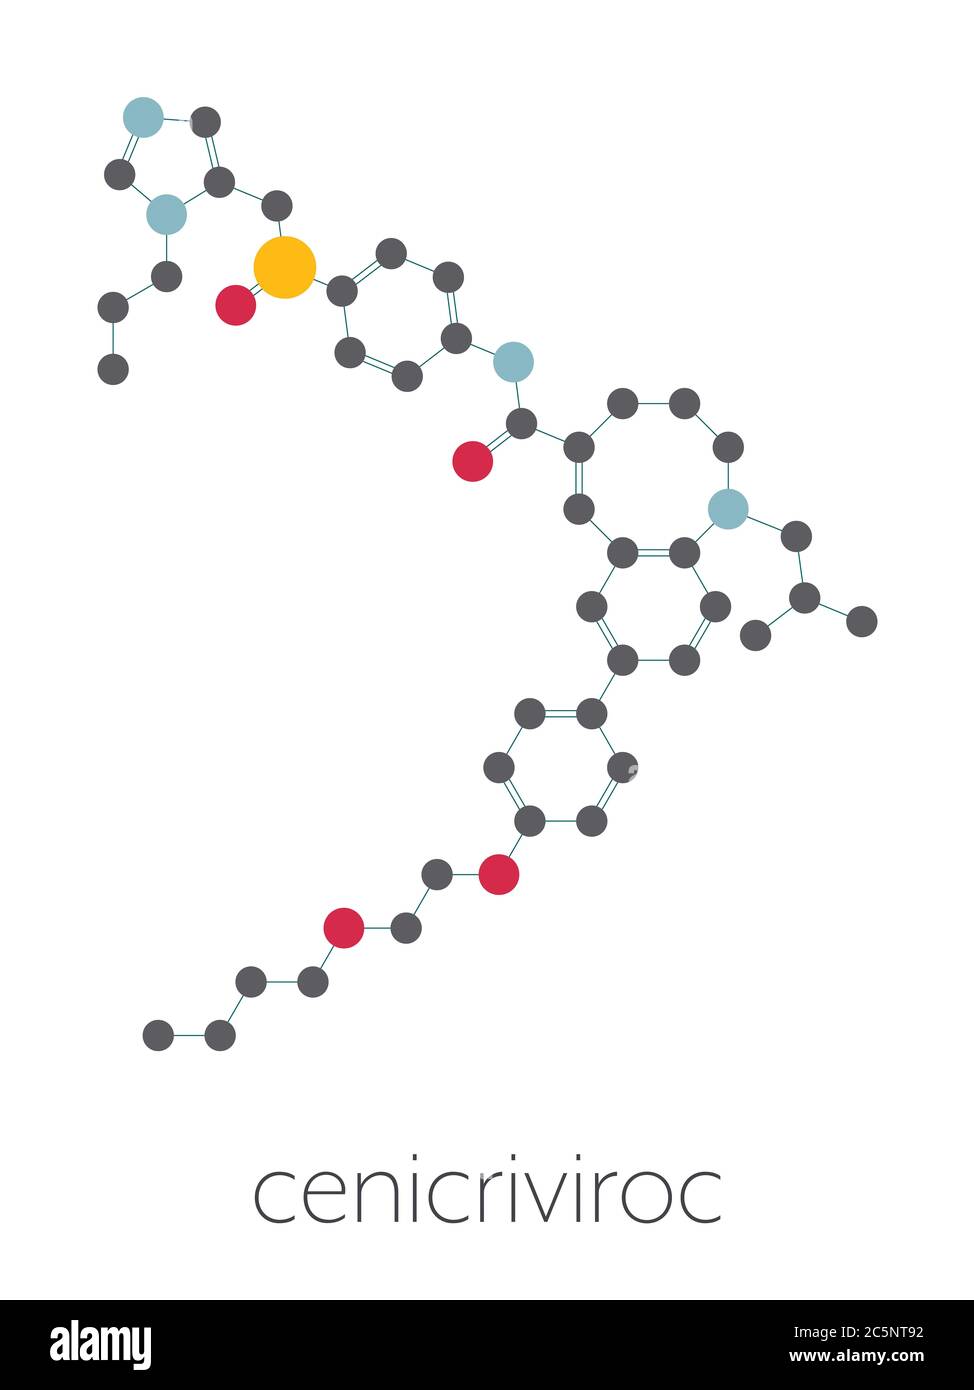 Cenicriviroc HIV drug molecule. Stylized skeletal formula (chemical structure): Atoms are shown as color-coded circles: hydrogen (hidden), carbon (grey), nitrogen (blue), oxygen (red), sulfur (yellow). Stock Photo